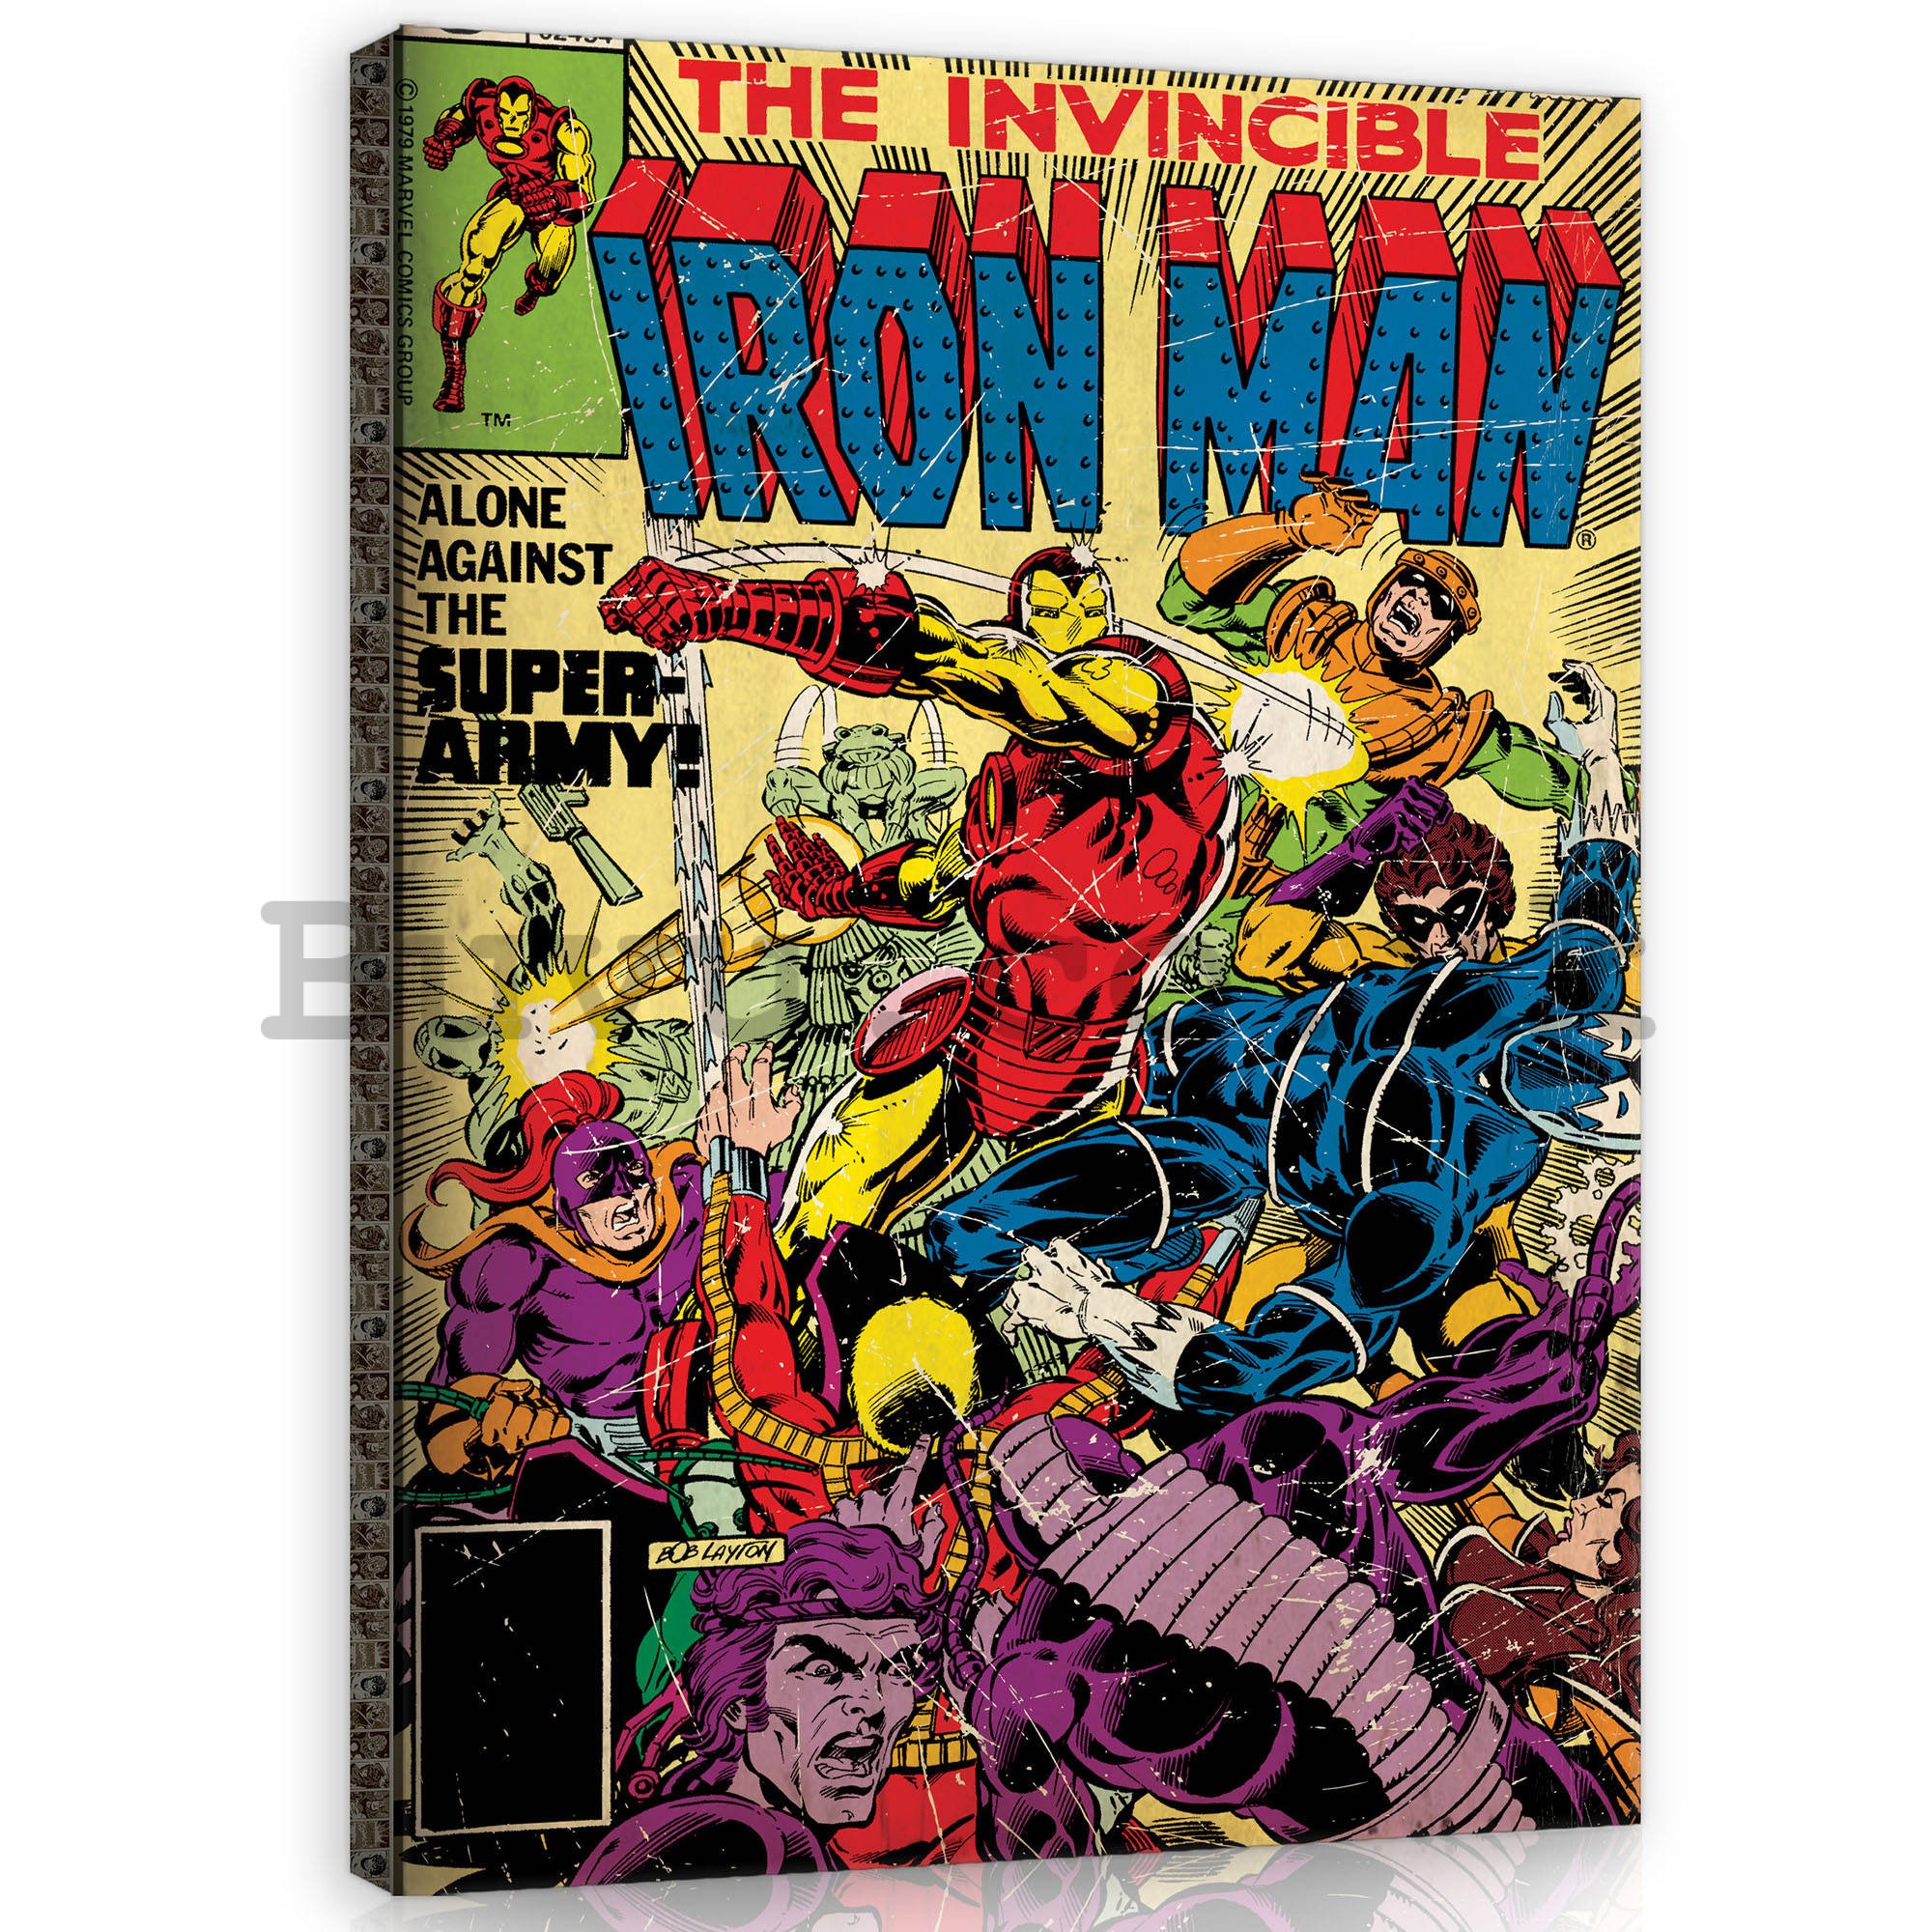 Painting on canvas: The Invincible Iron Man (Alone Against the Super-Army!) - 80x60 cm